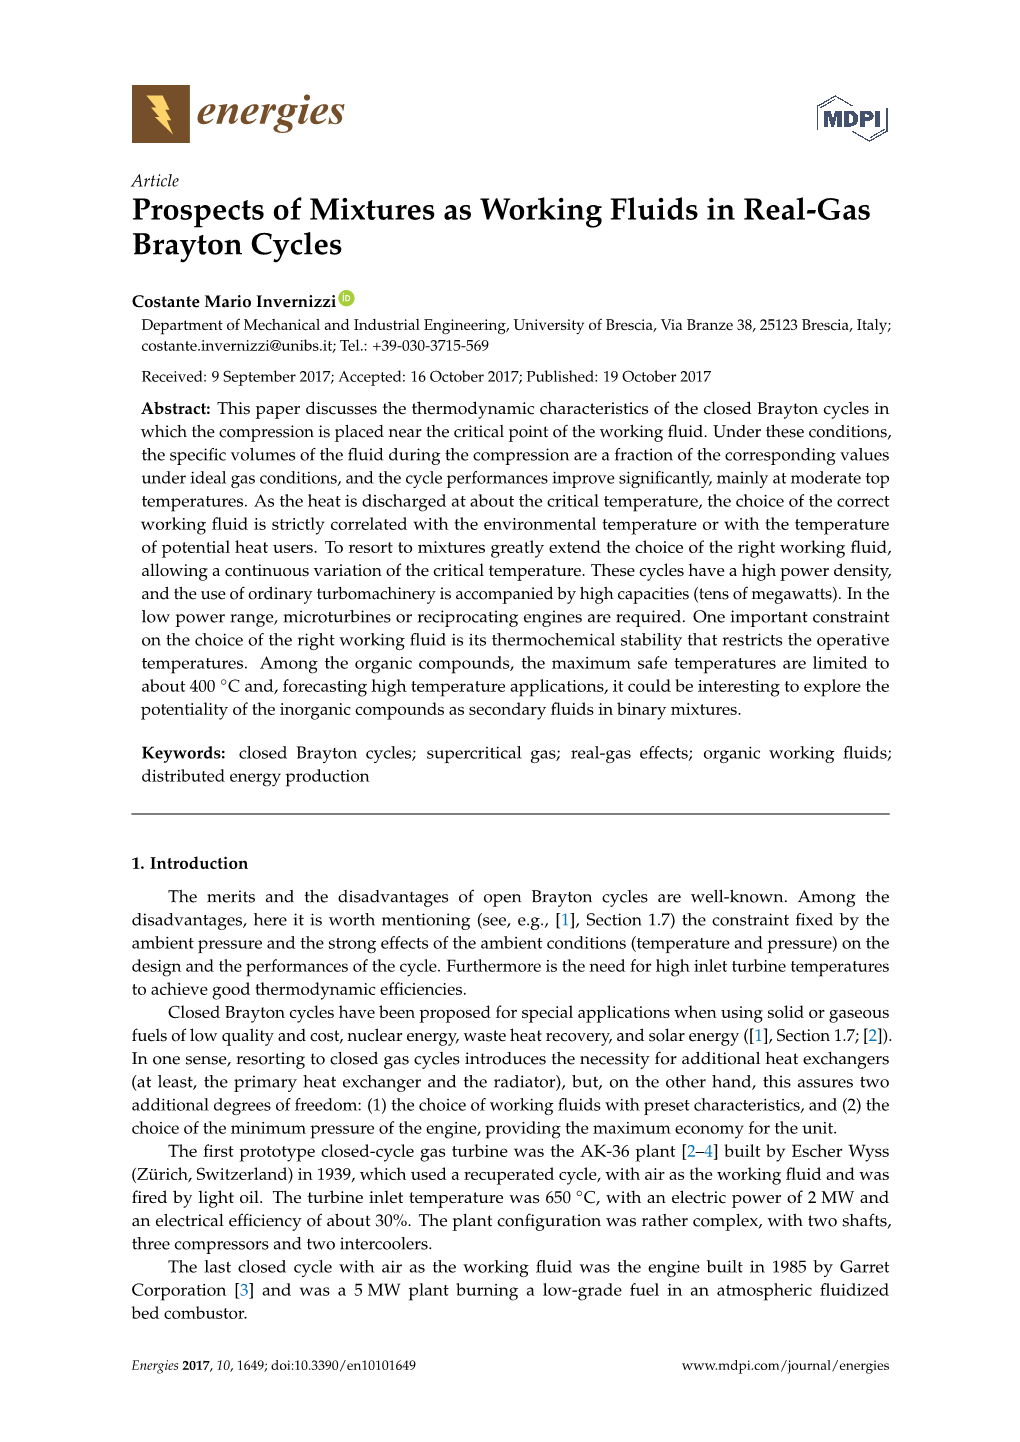 Prospects of Mixtures As Working Fluids in Real-Gas Brayton Cycles